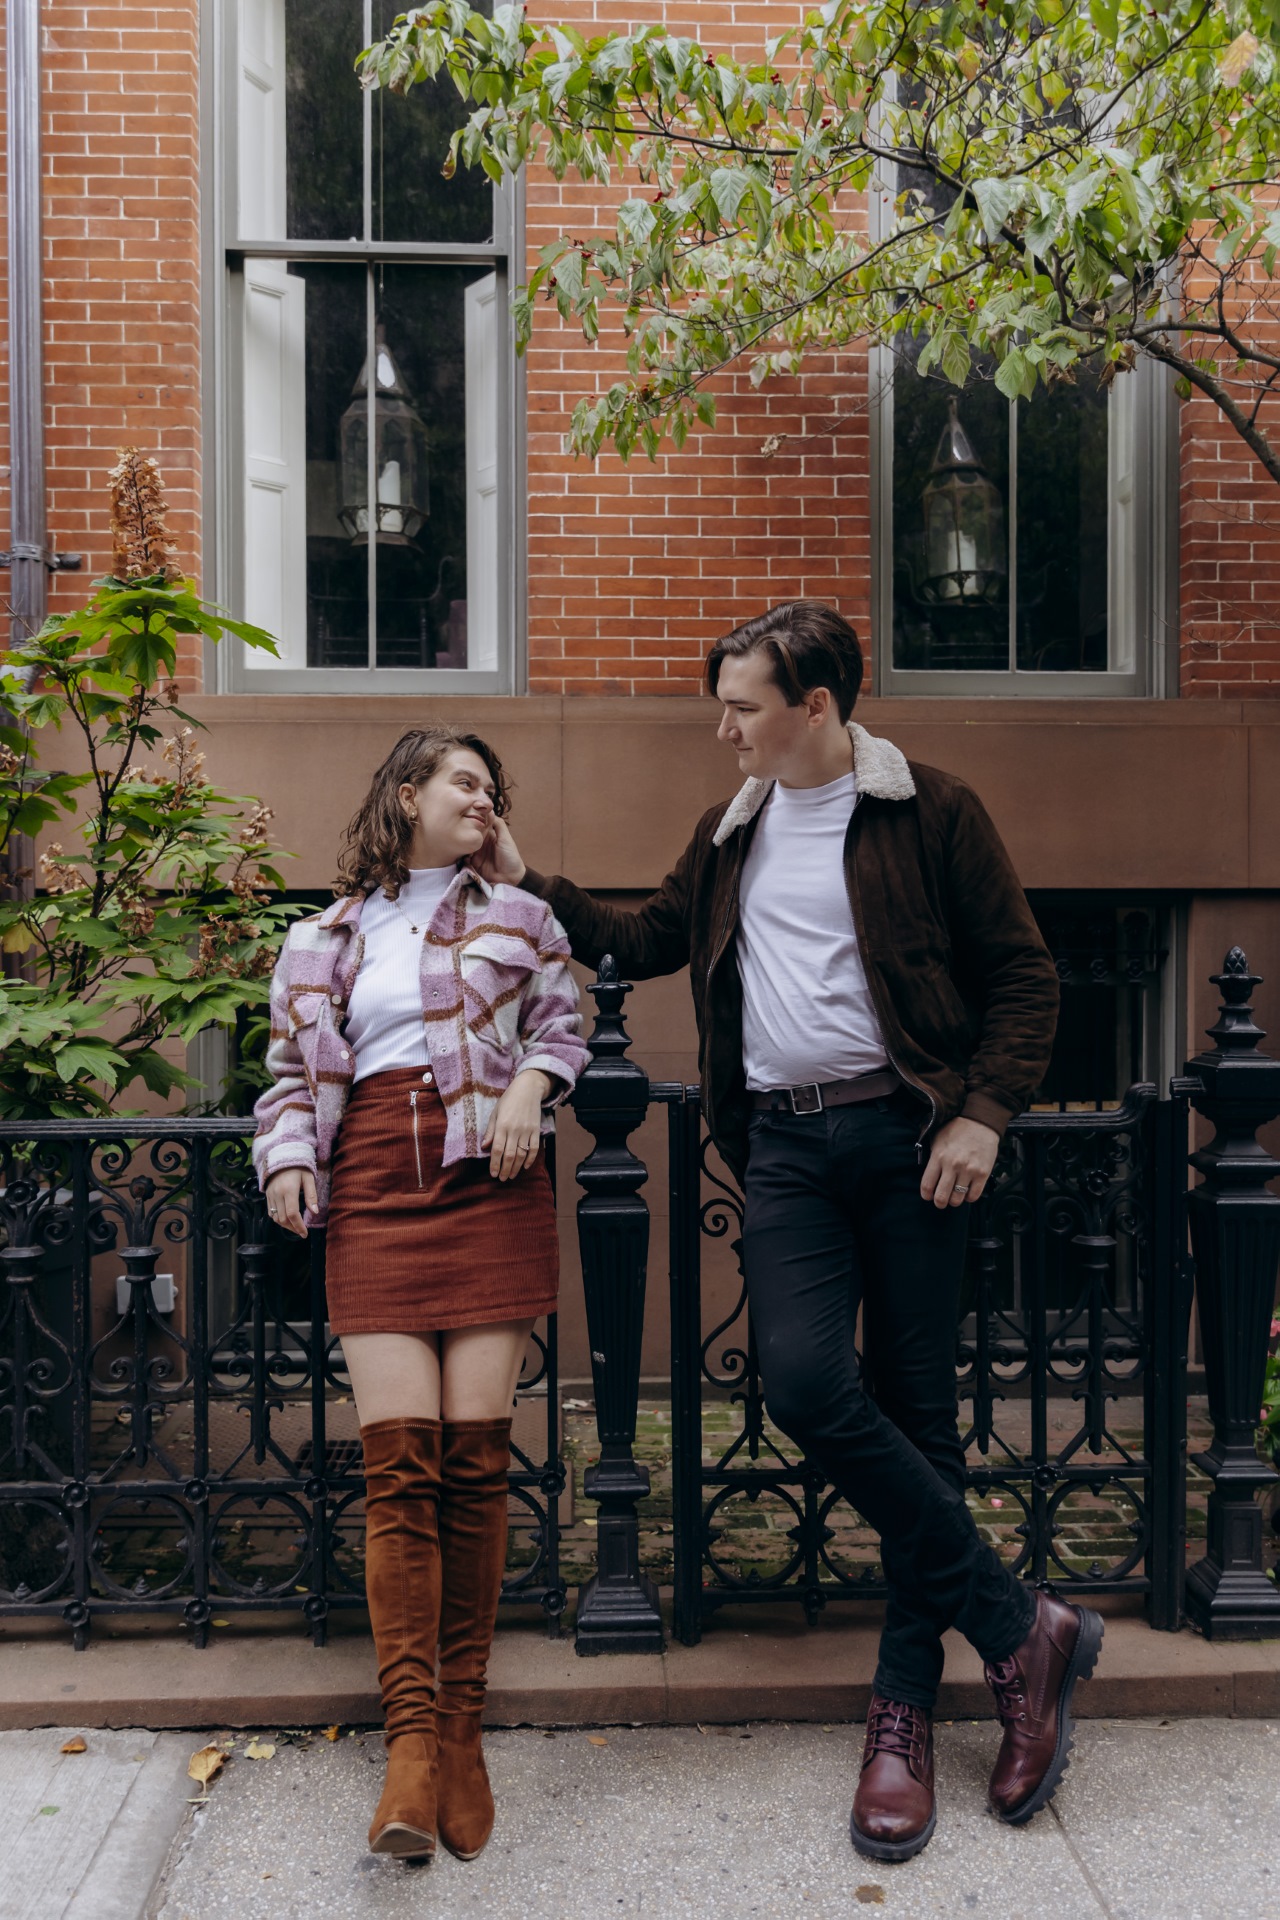 Engagement photos in west village nyc (4)